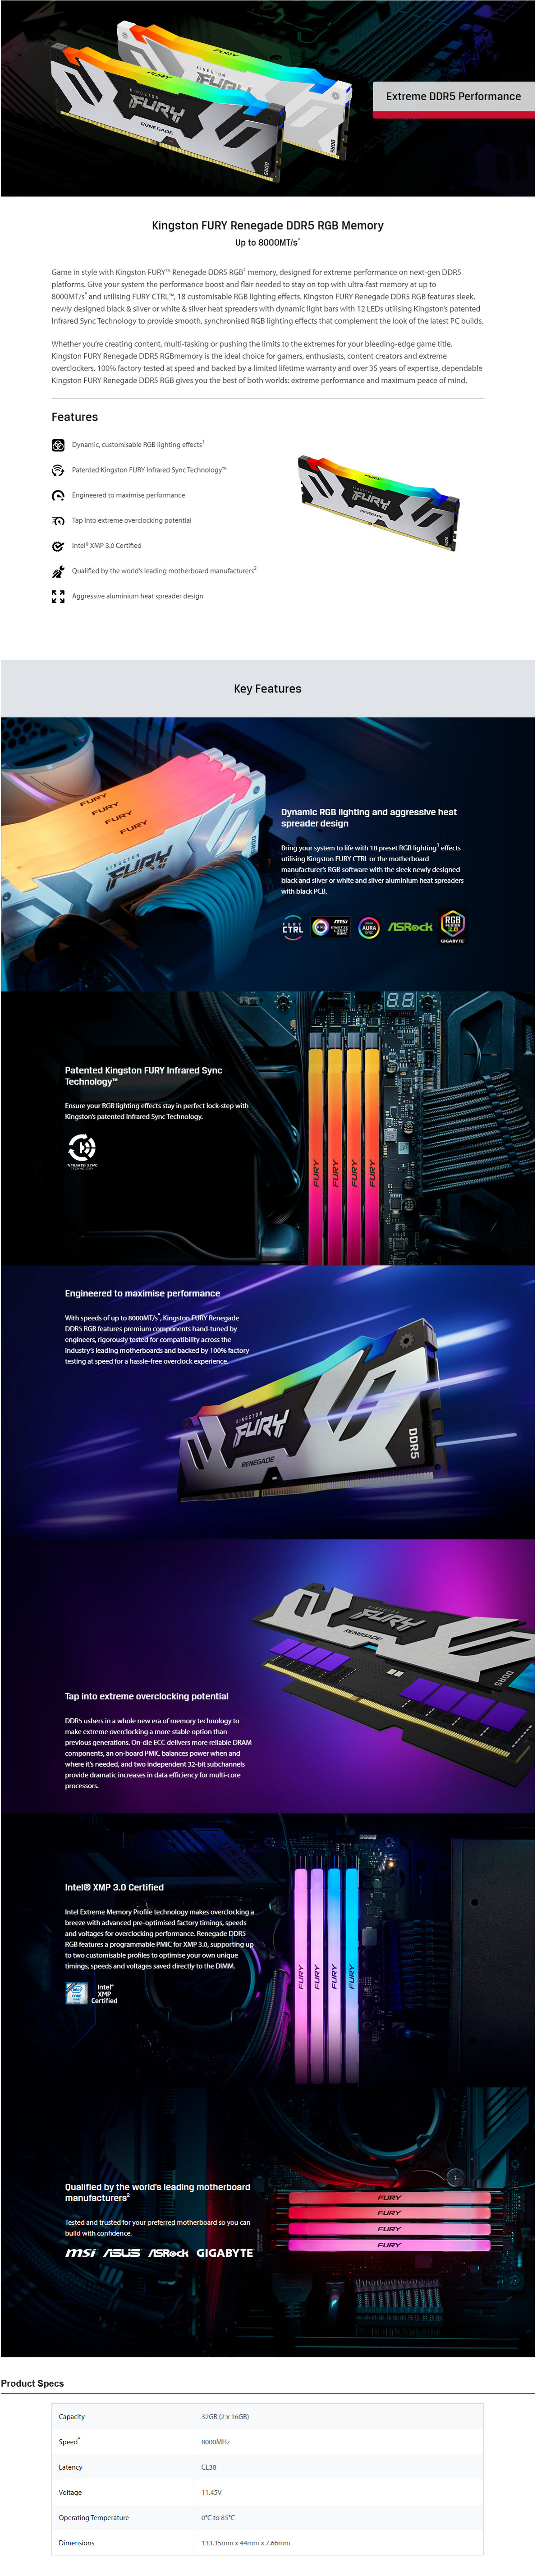 A large marketing image providing additional information about the product Kingston 32GB Kit (2x16GB) DDR5 Fury Renegade RGB C38 8000MHz - Additional alt info not provided